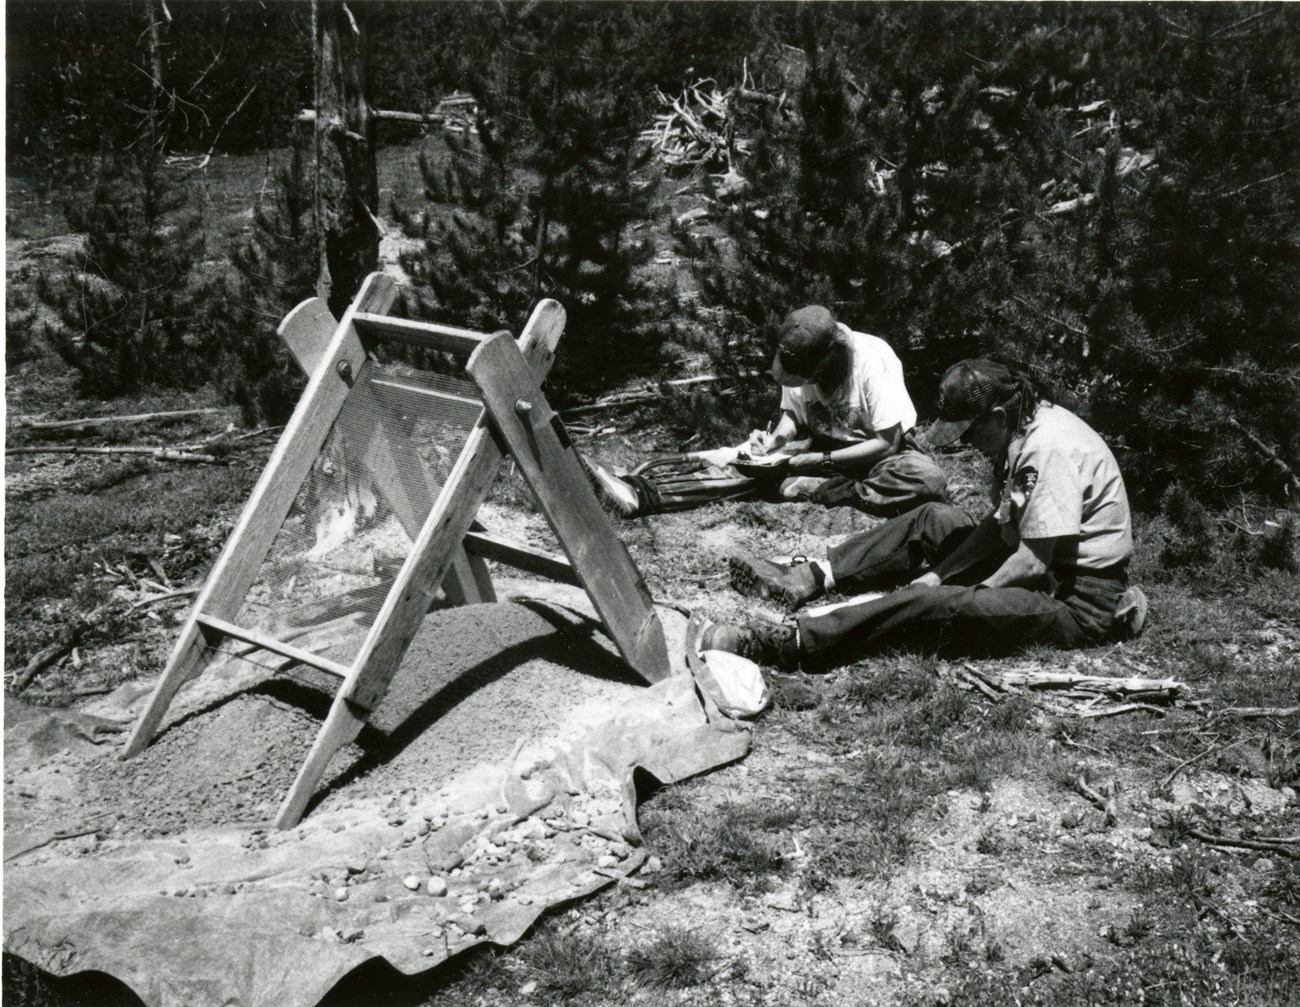 Two archeologists work on a road project excavation